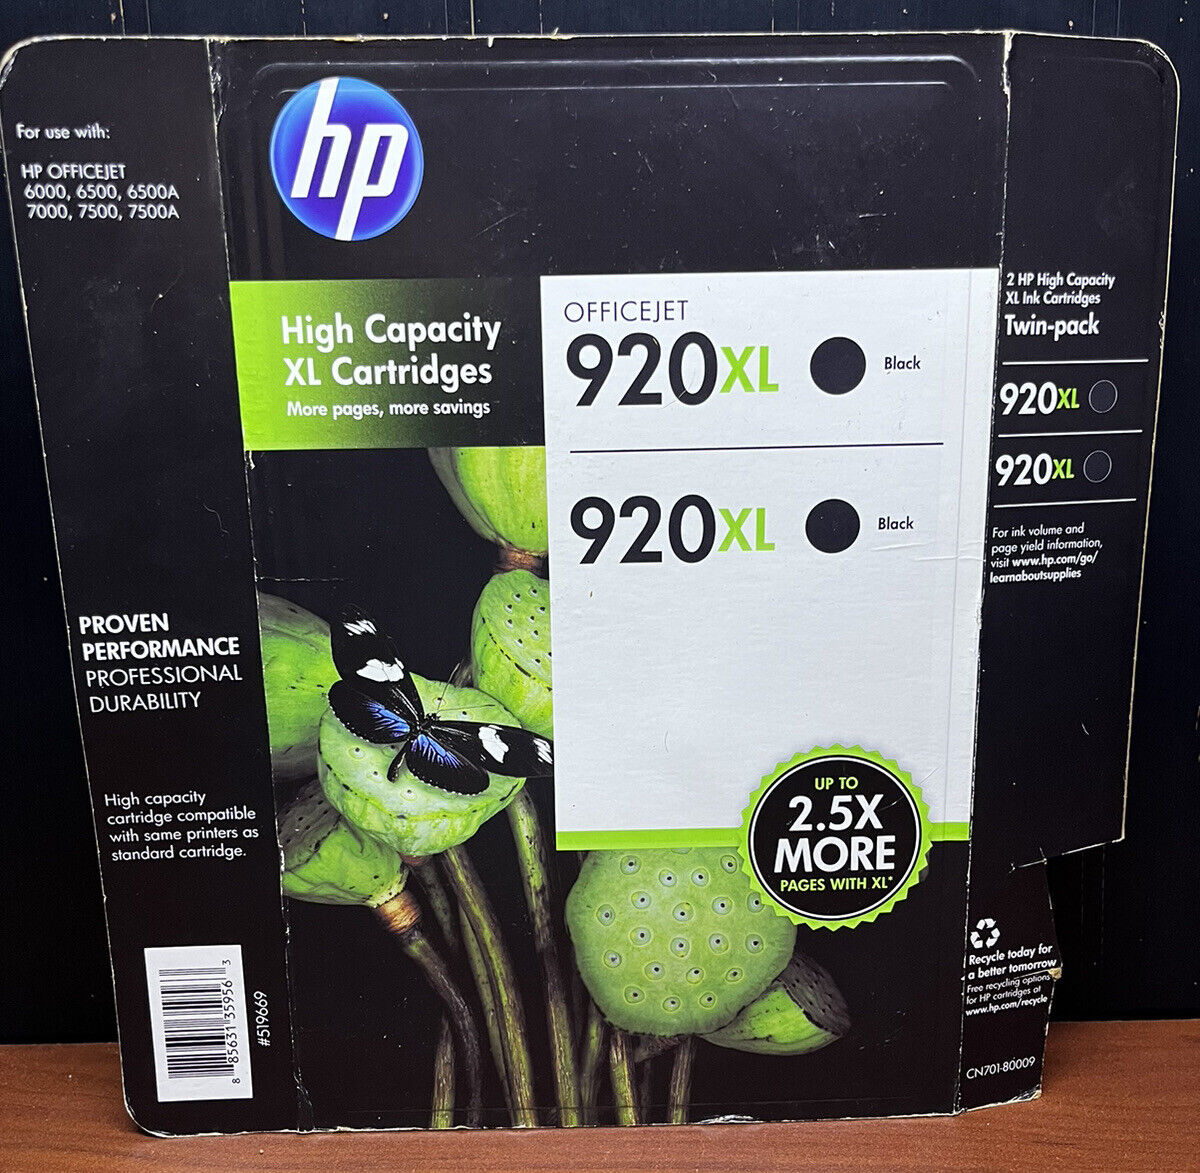 New in box HP 920XL High Yield BLACK Ink Cartridges 2-Pack Exp 6/2015